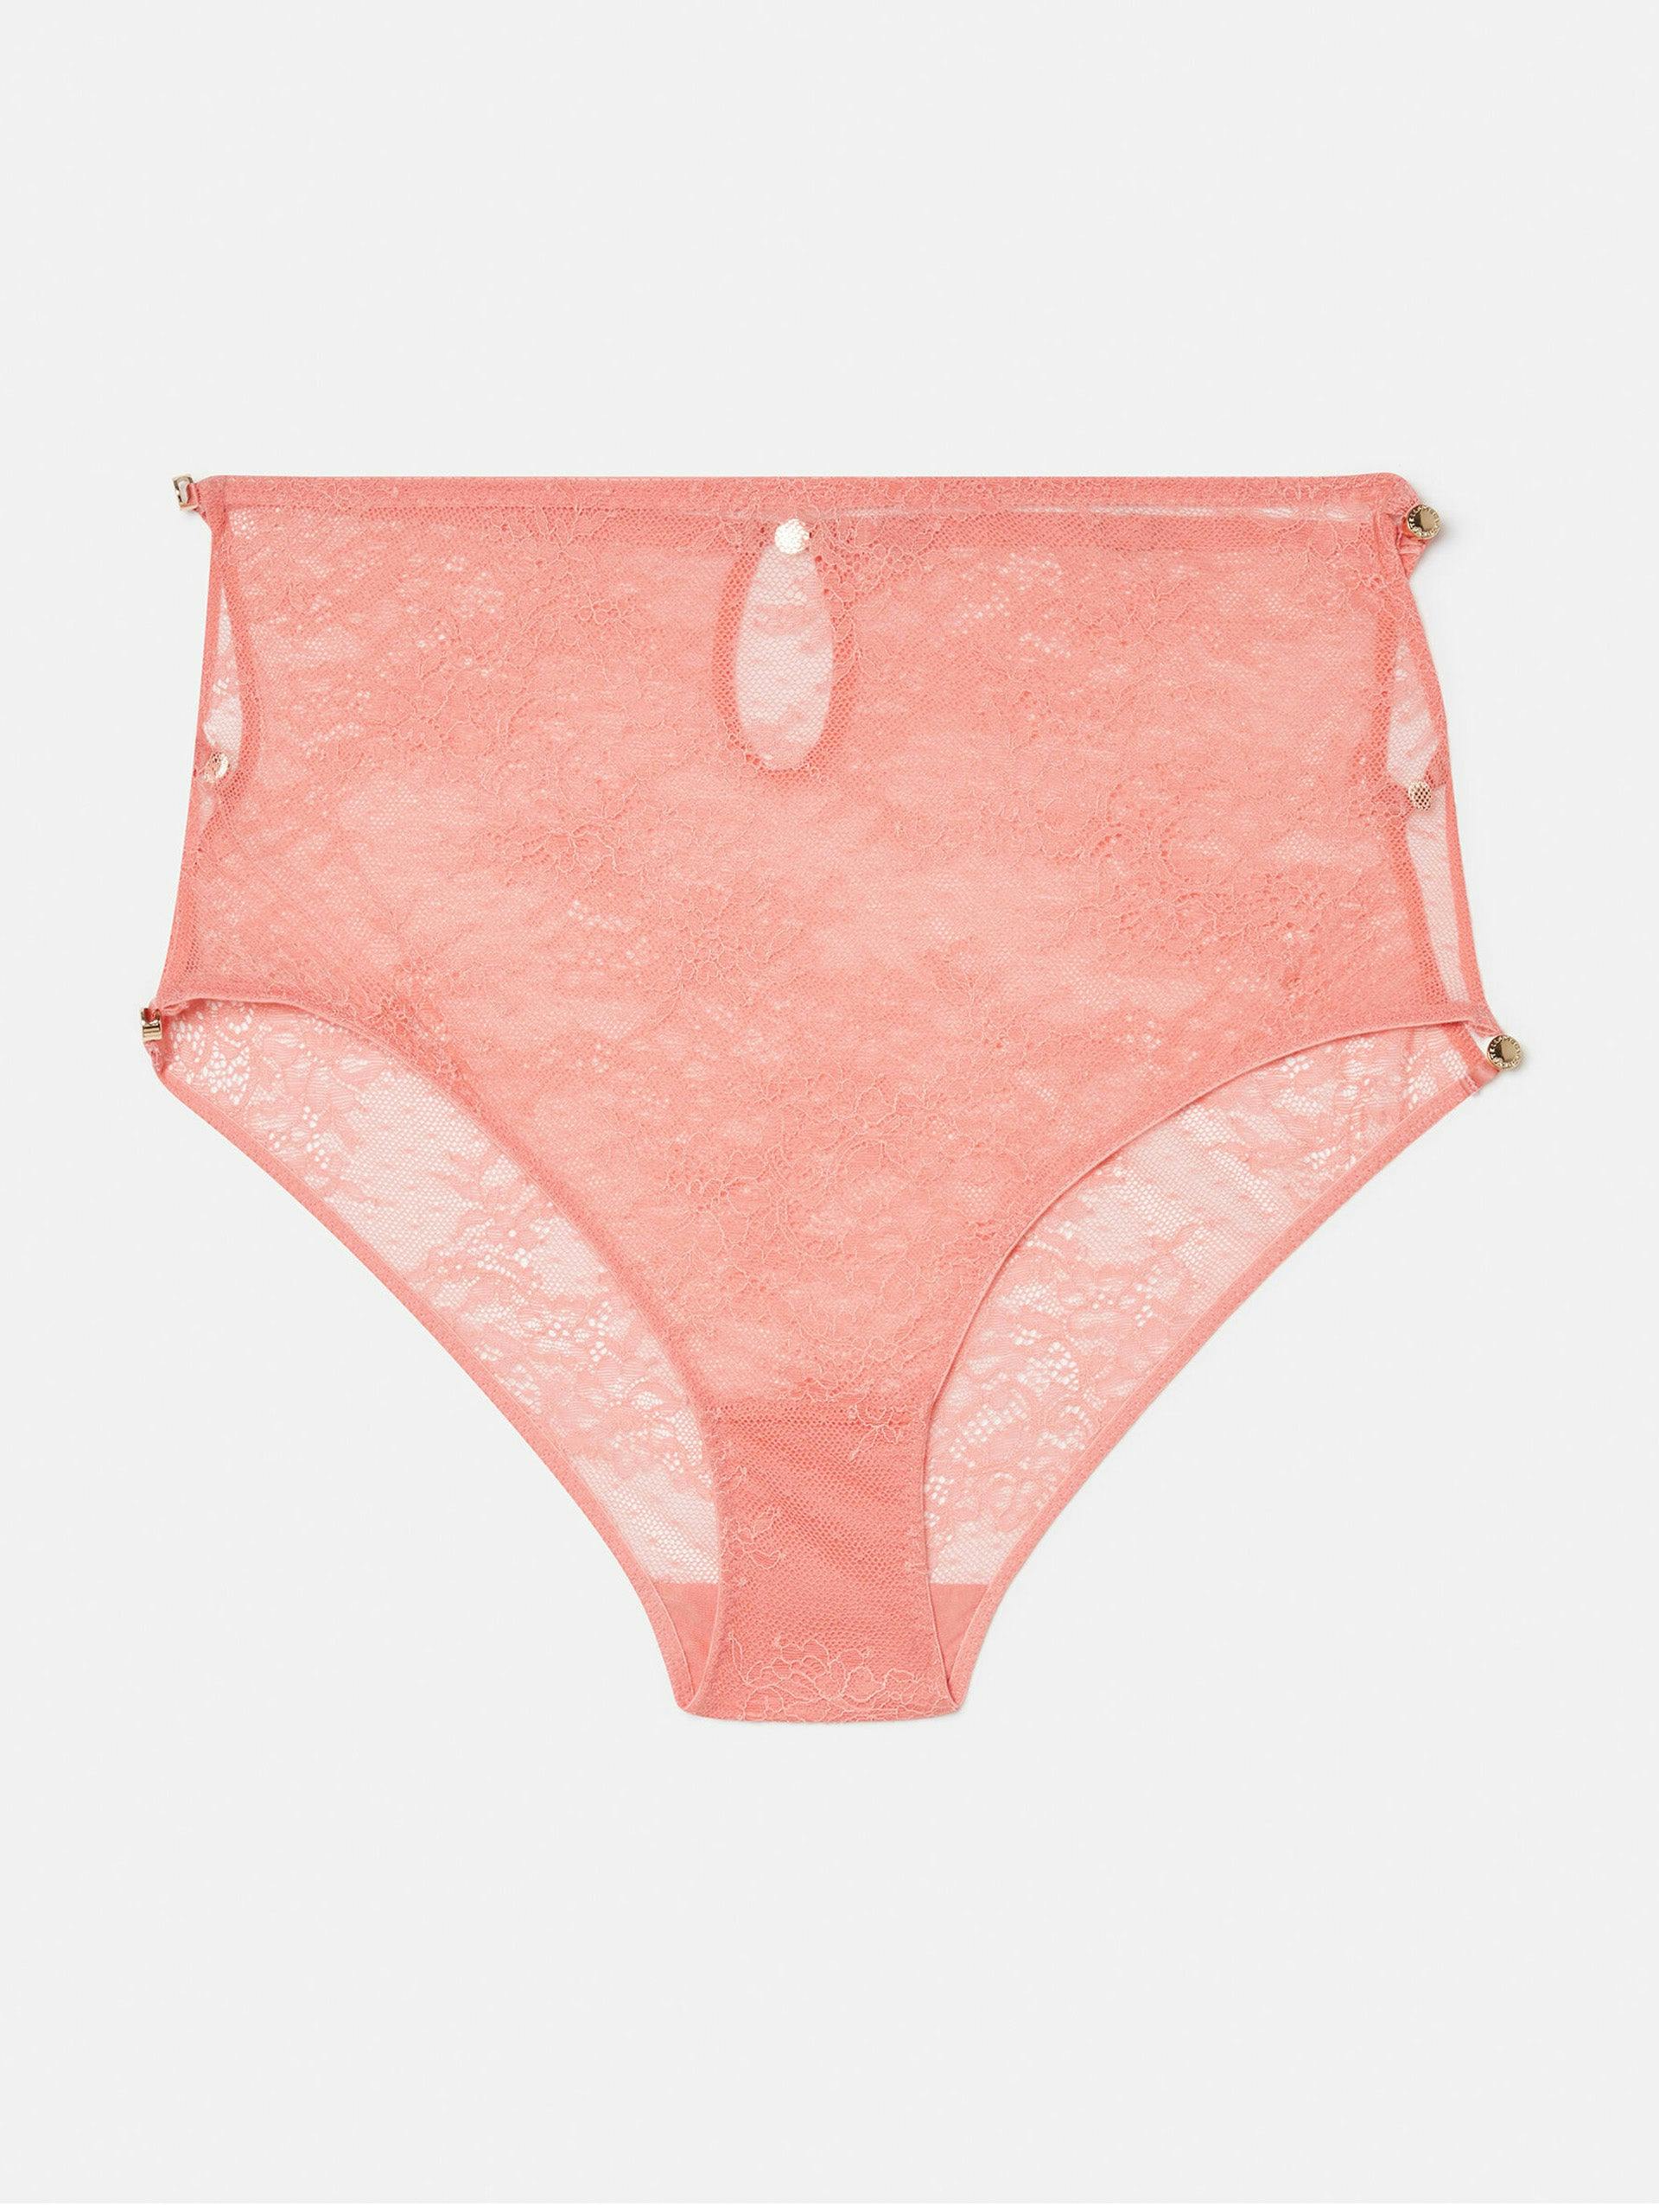 Pink lace high waisted knickers